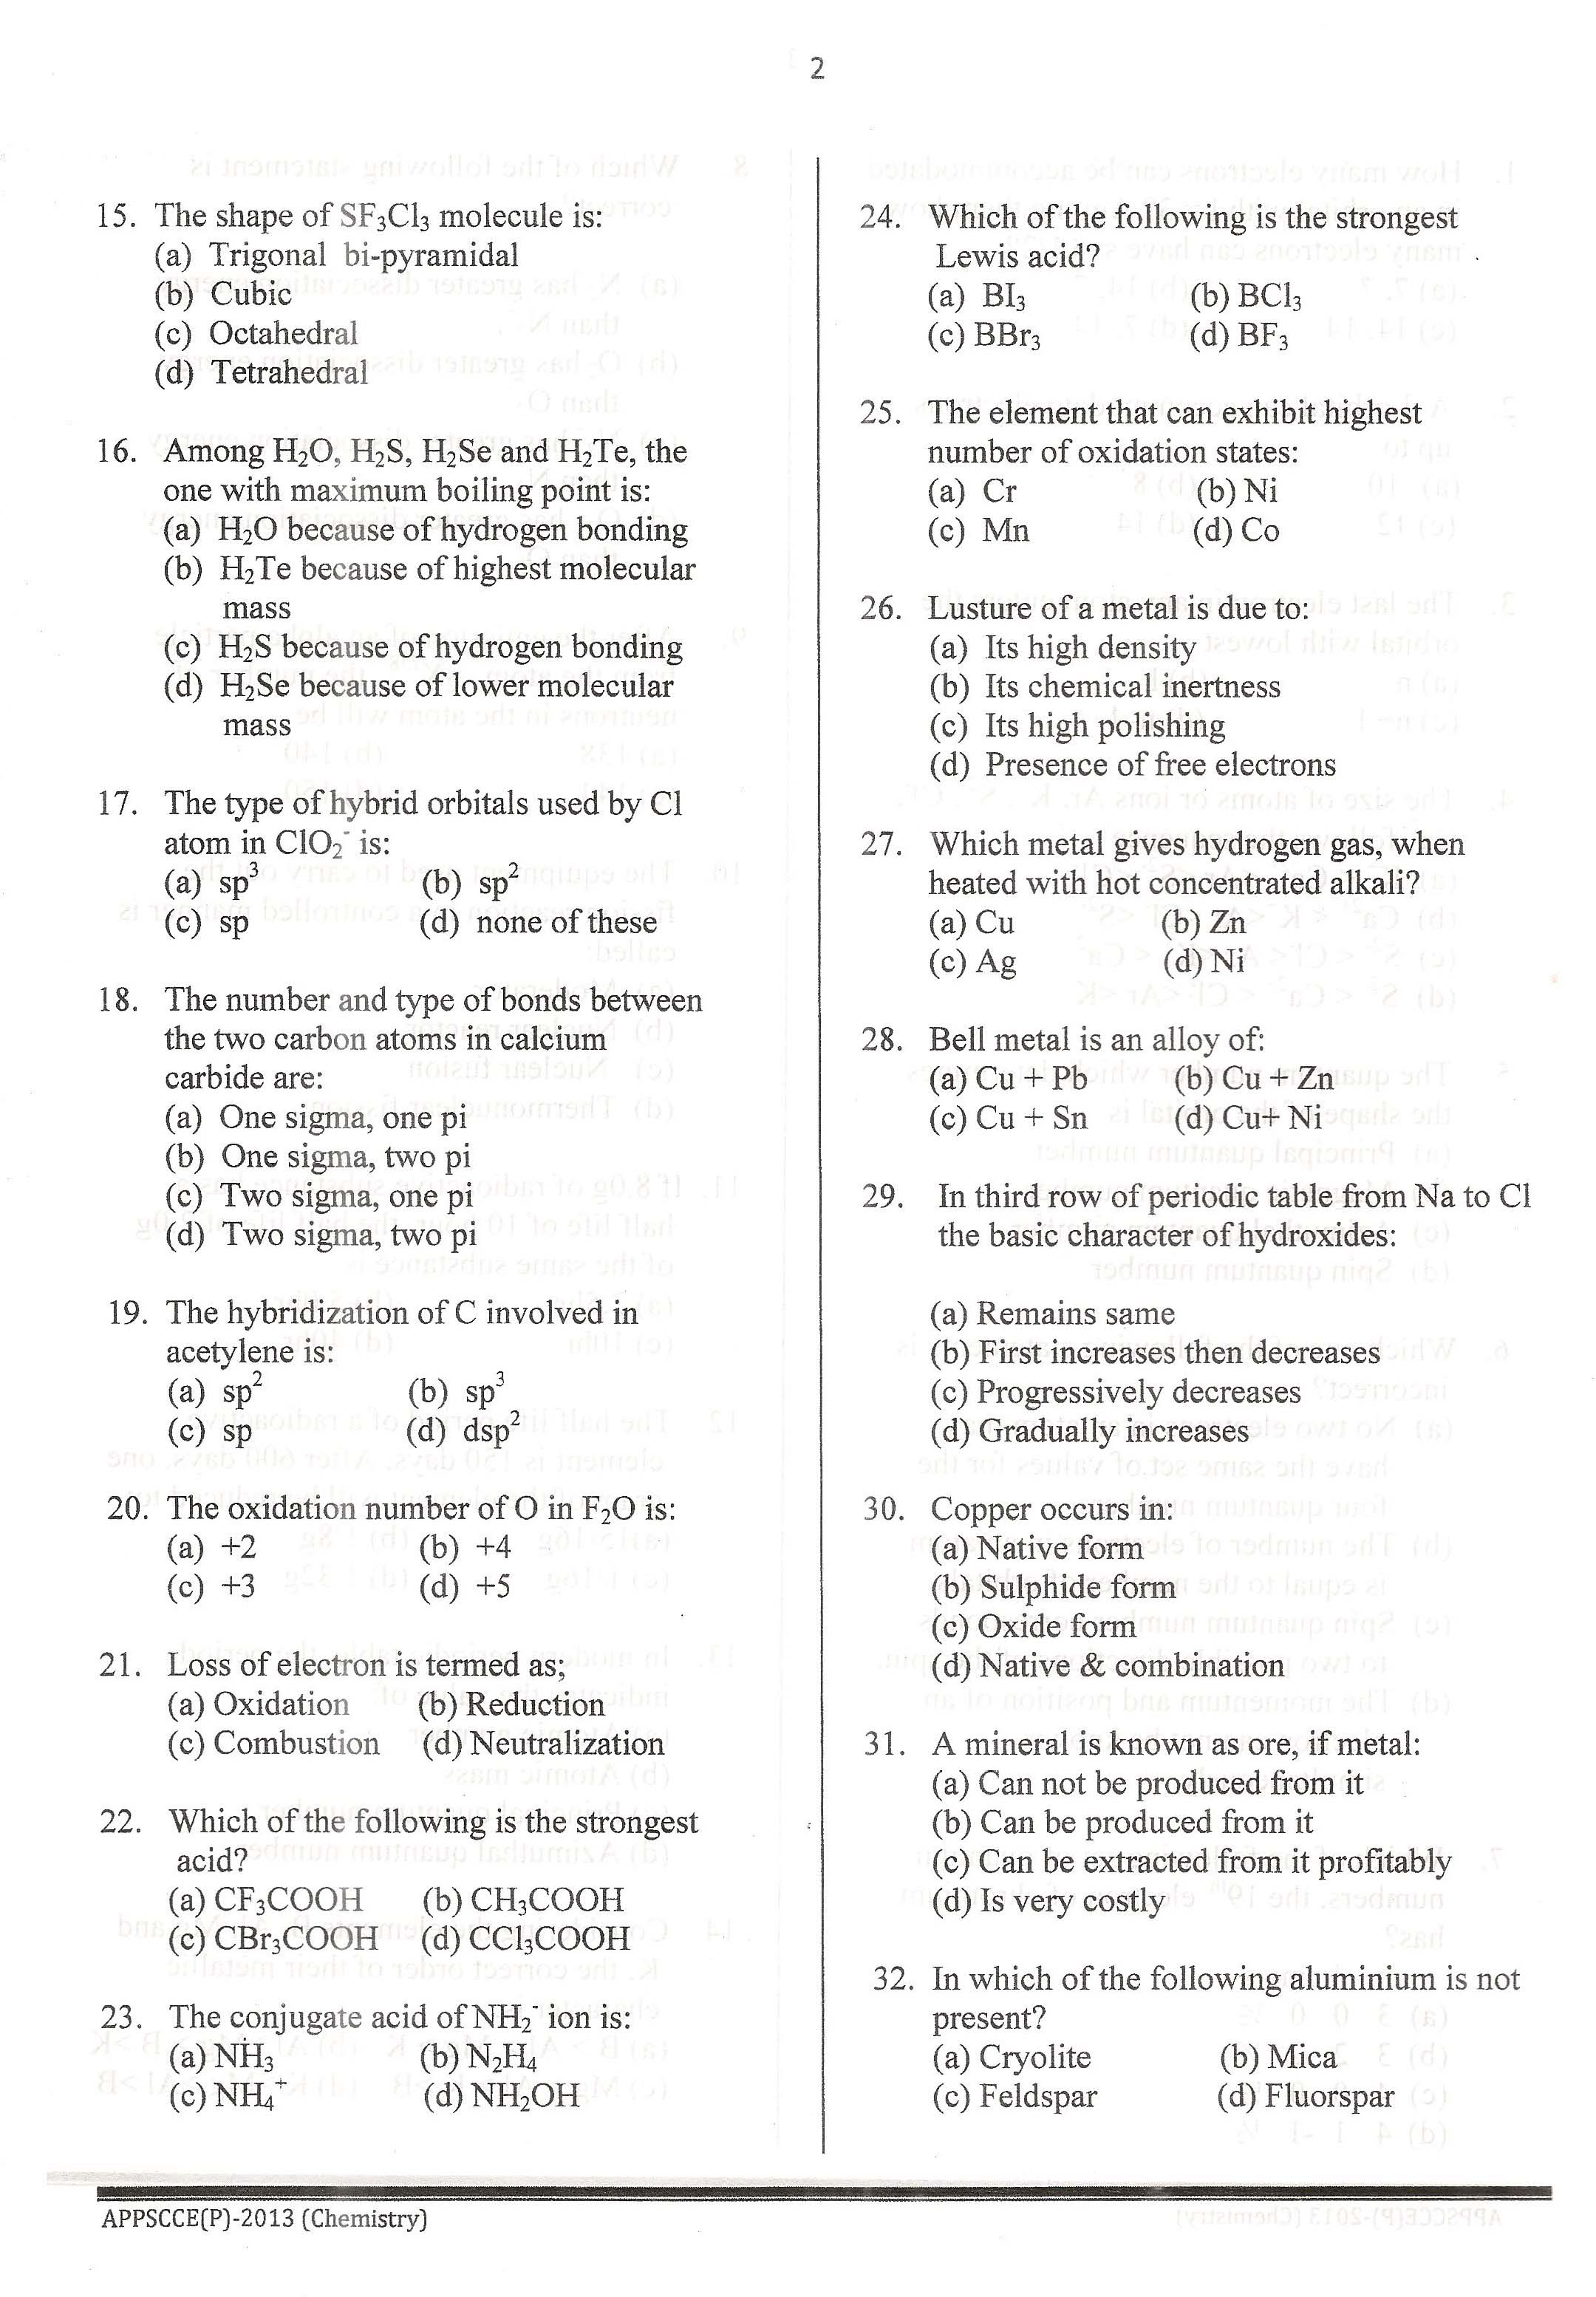 APPSC Combined Competitive Prelims Exam 2013 Chemistry 3